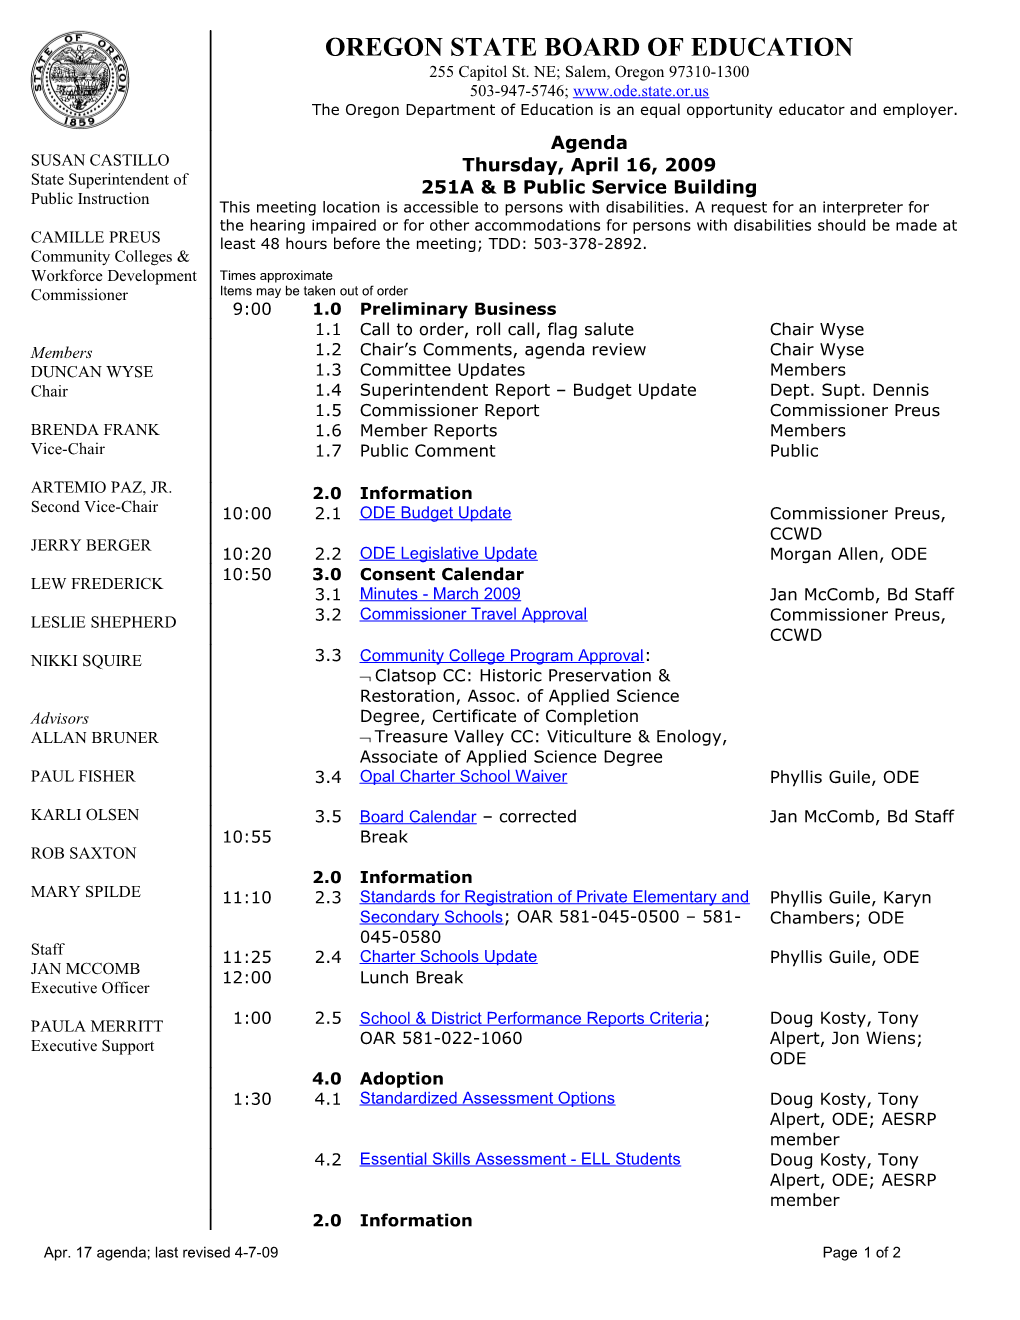 Apr. 17 Agenda; Last Revised 4-7-09 Page 2 of 2